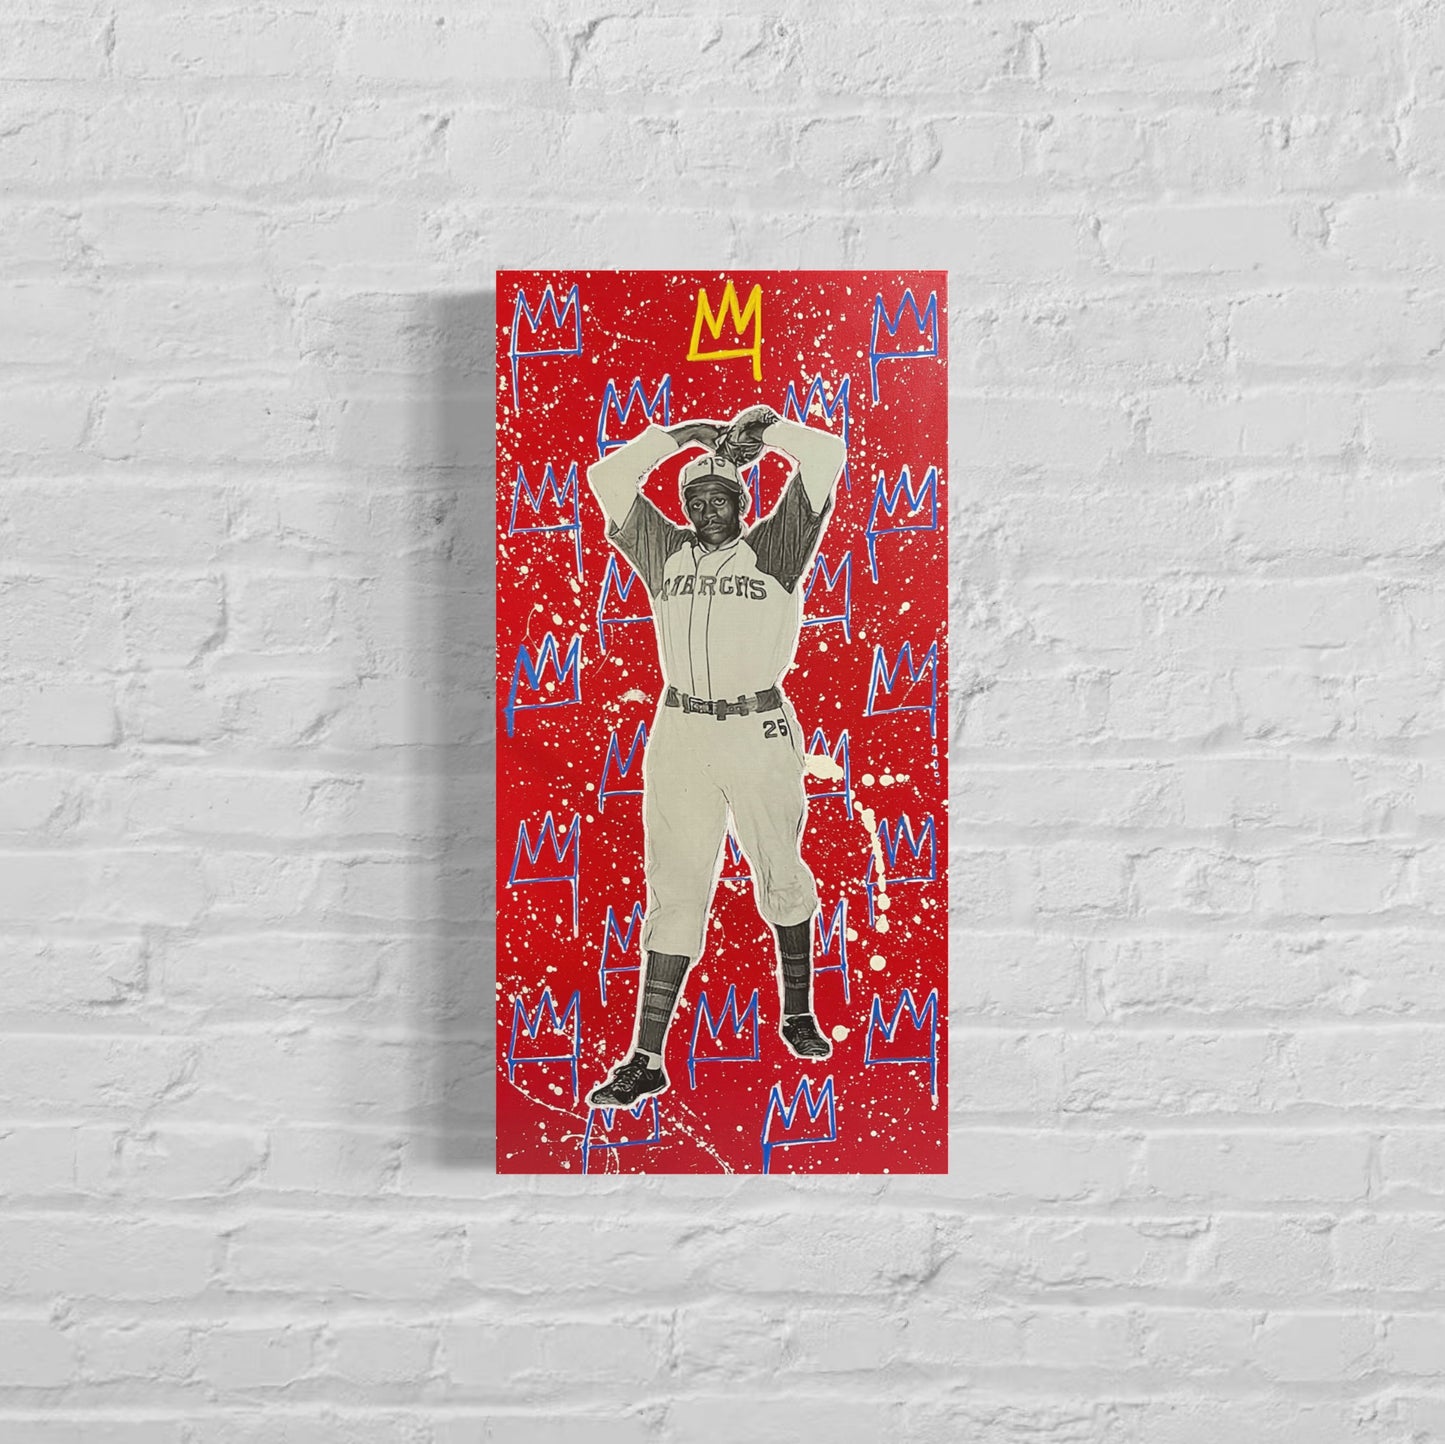 Satchel Paige, 2022. Original 1/1 Mixed Media on 12x24x1.5in Canvas